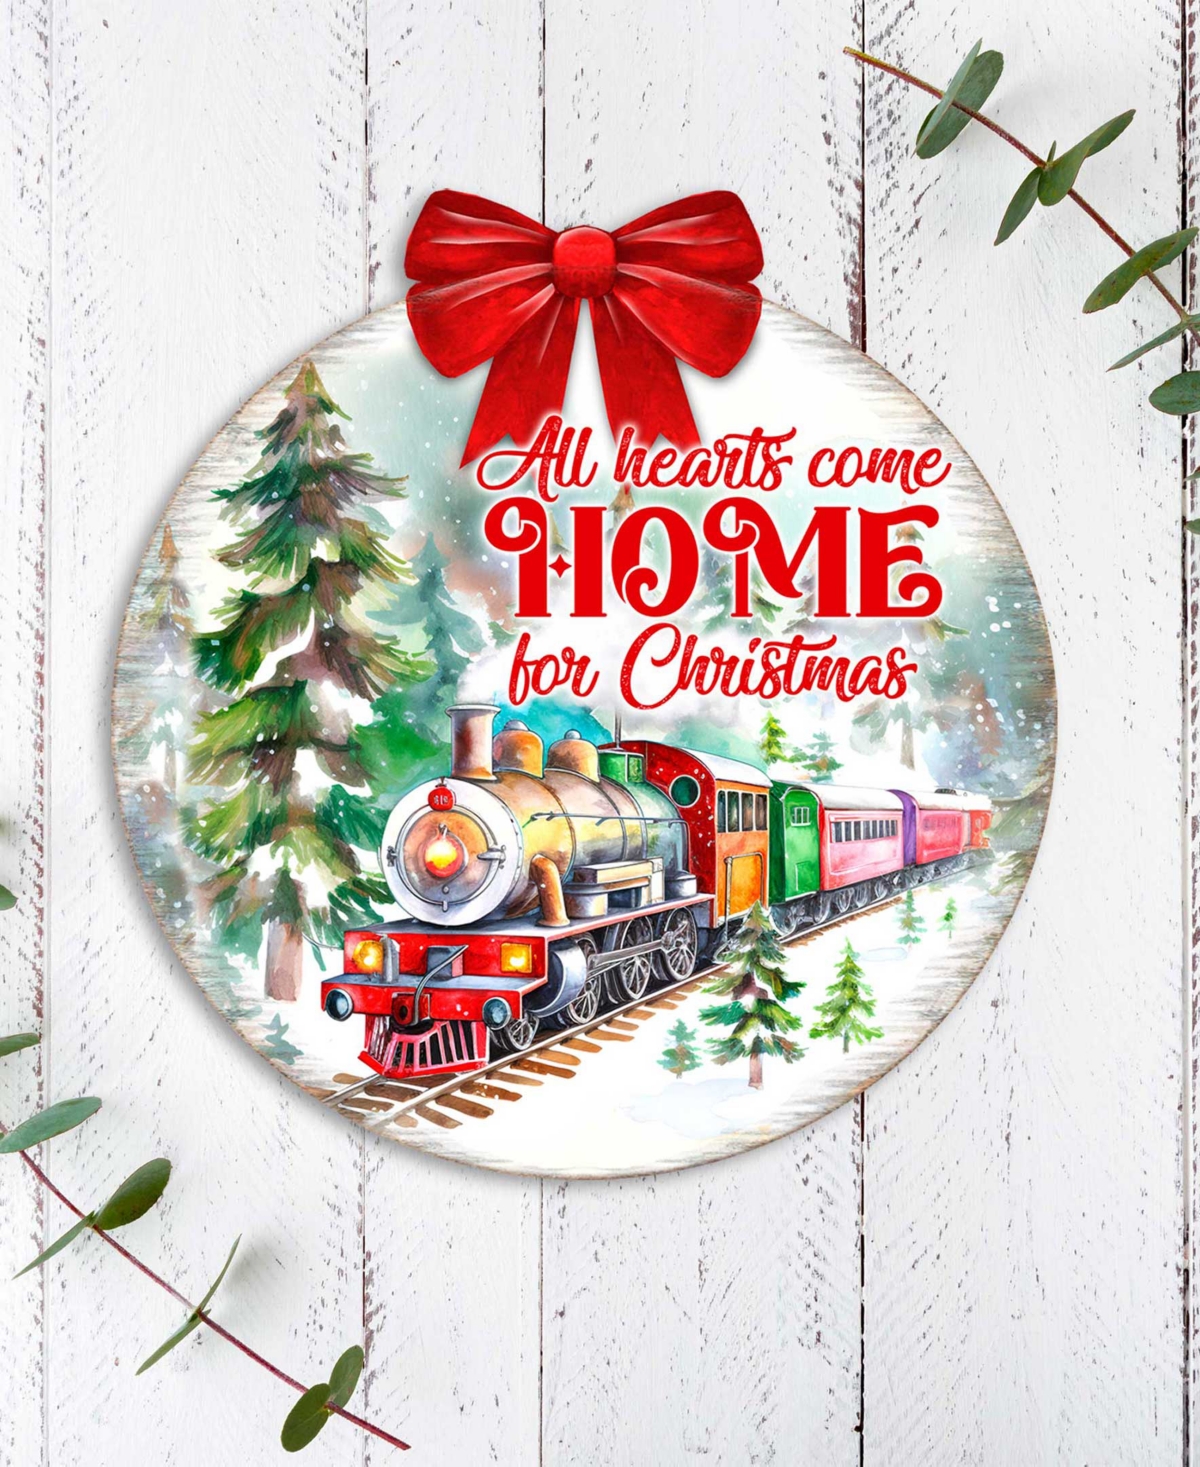 Shop Designocracy All Hearts Come Home For Christmas Wooden Door Decor Welcome Sign G. Debrekht In Multi Color